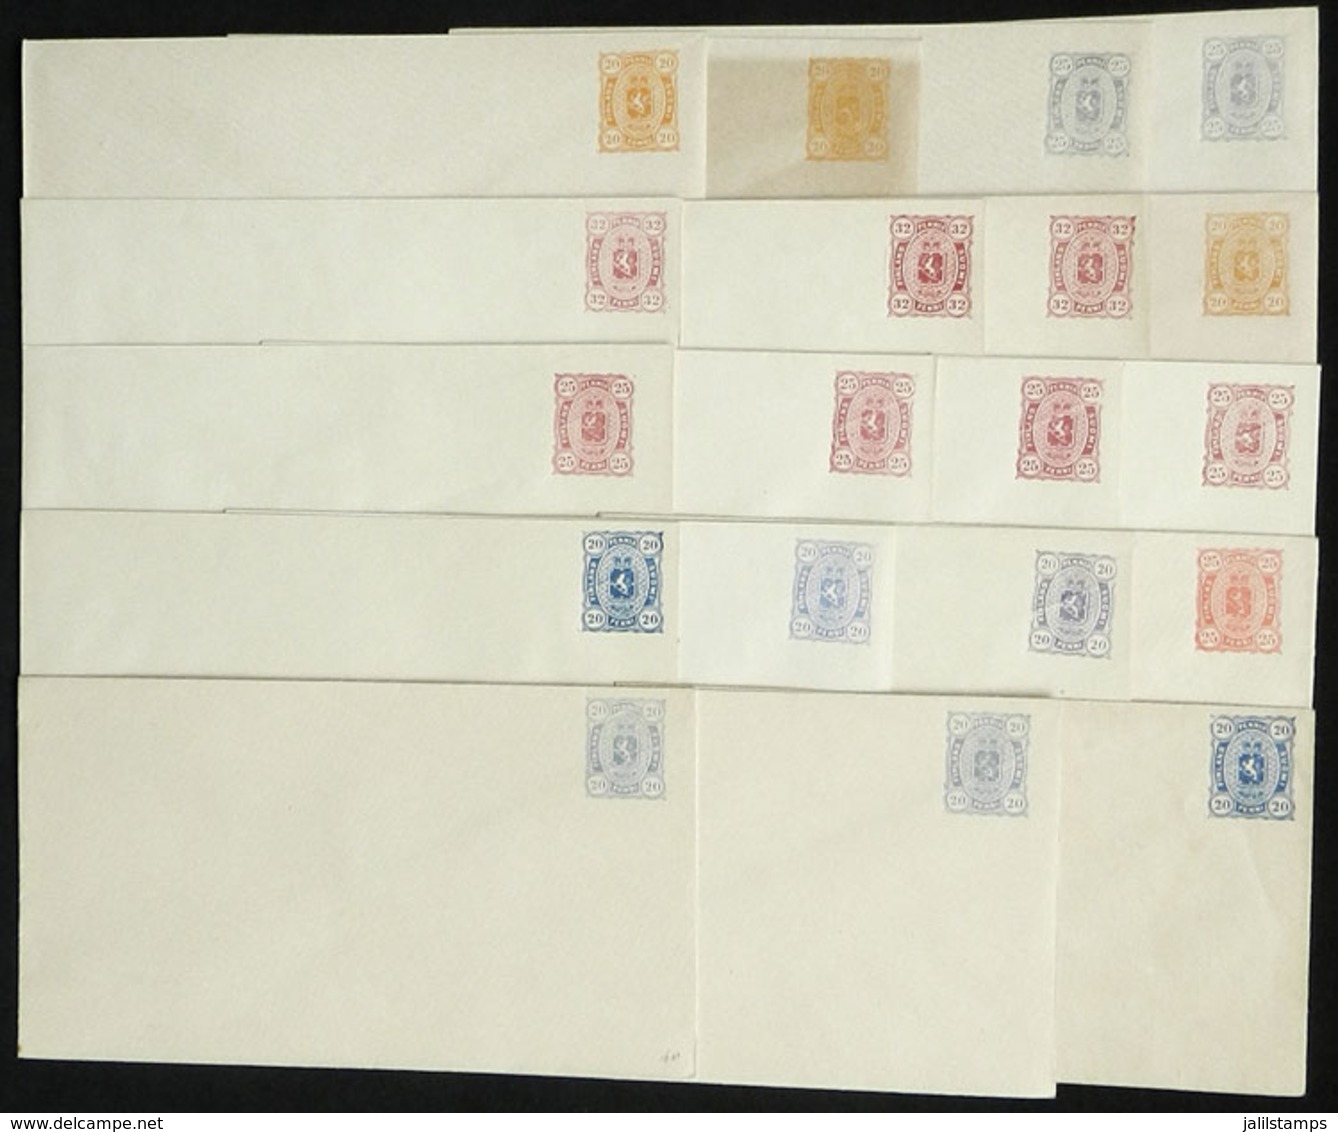 FINLAND: 20 Very Old Stationery Envelopes, Unused, Excellent Quality. There Are Different Colors, Some Rare, High Catalo - Enteros Postales